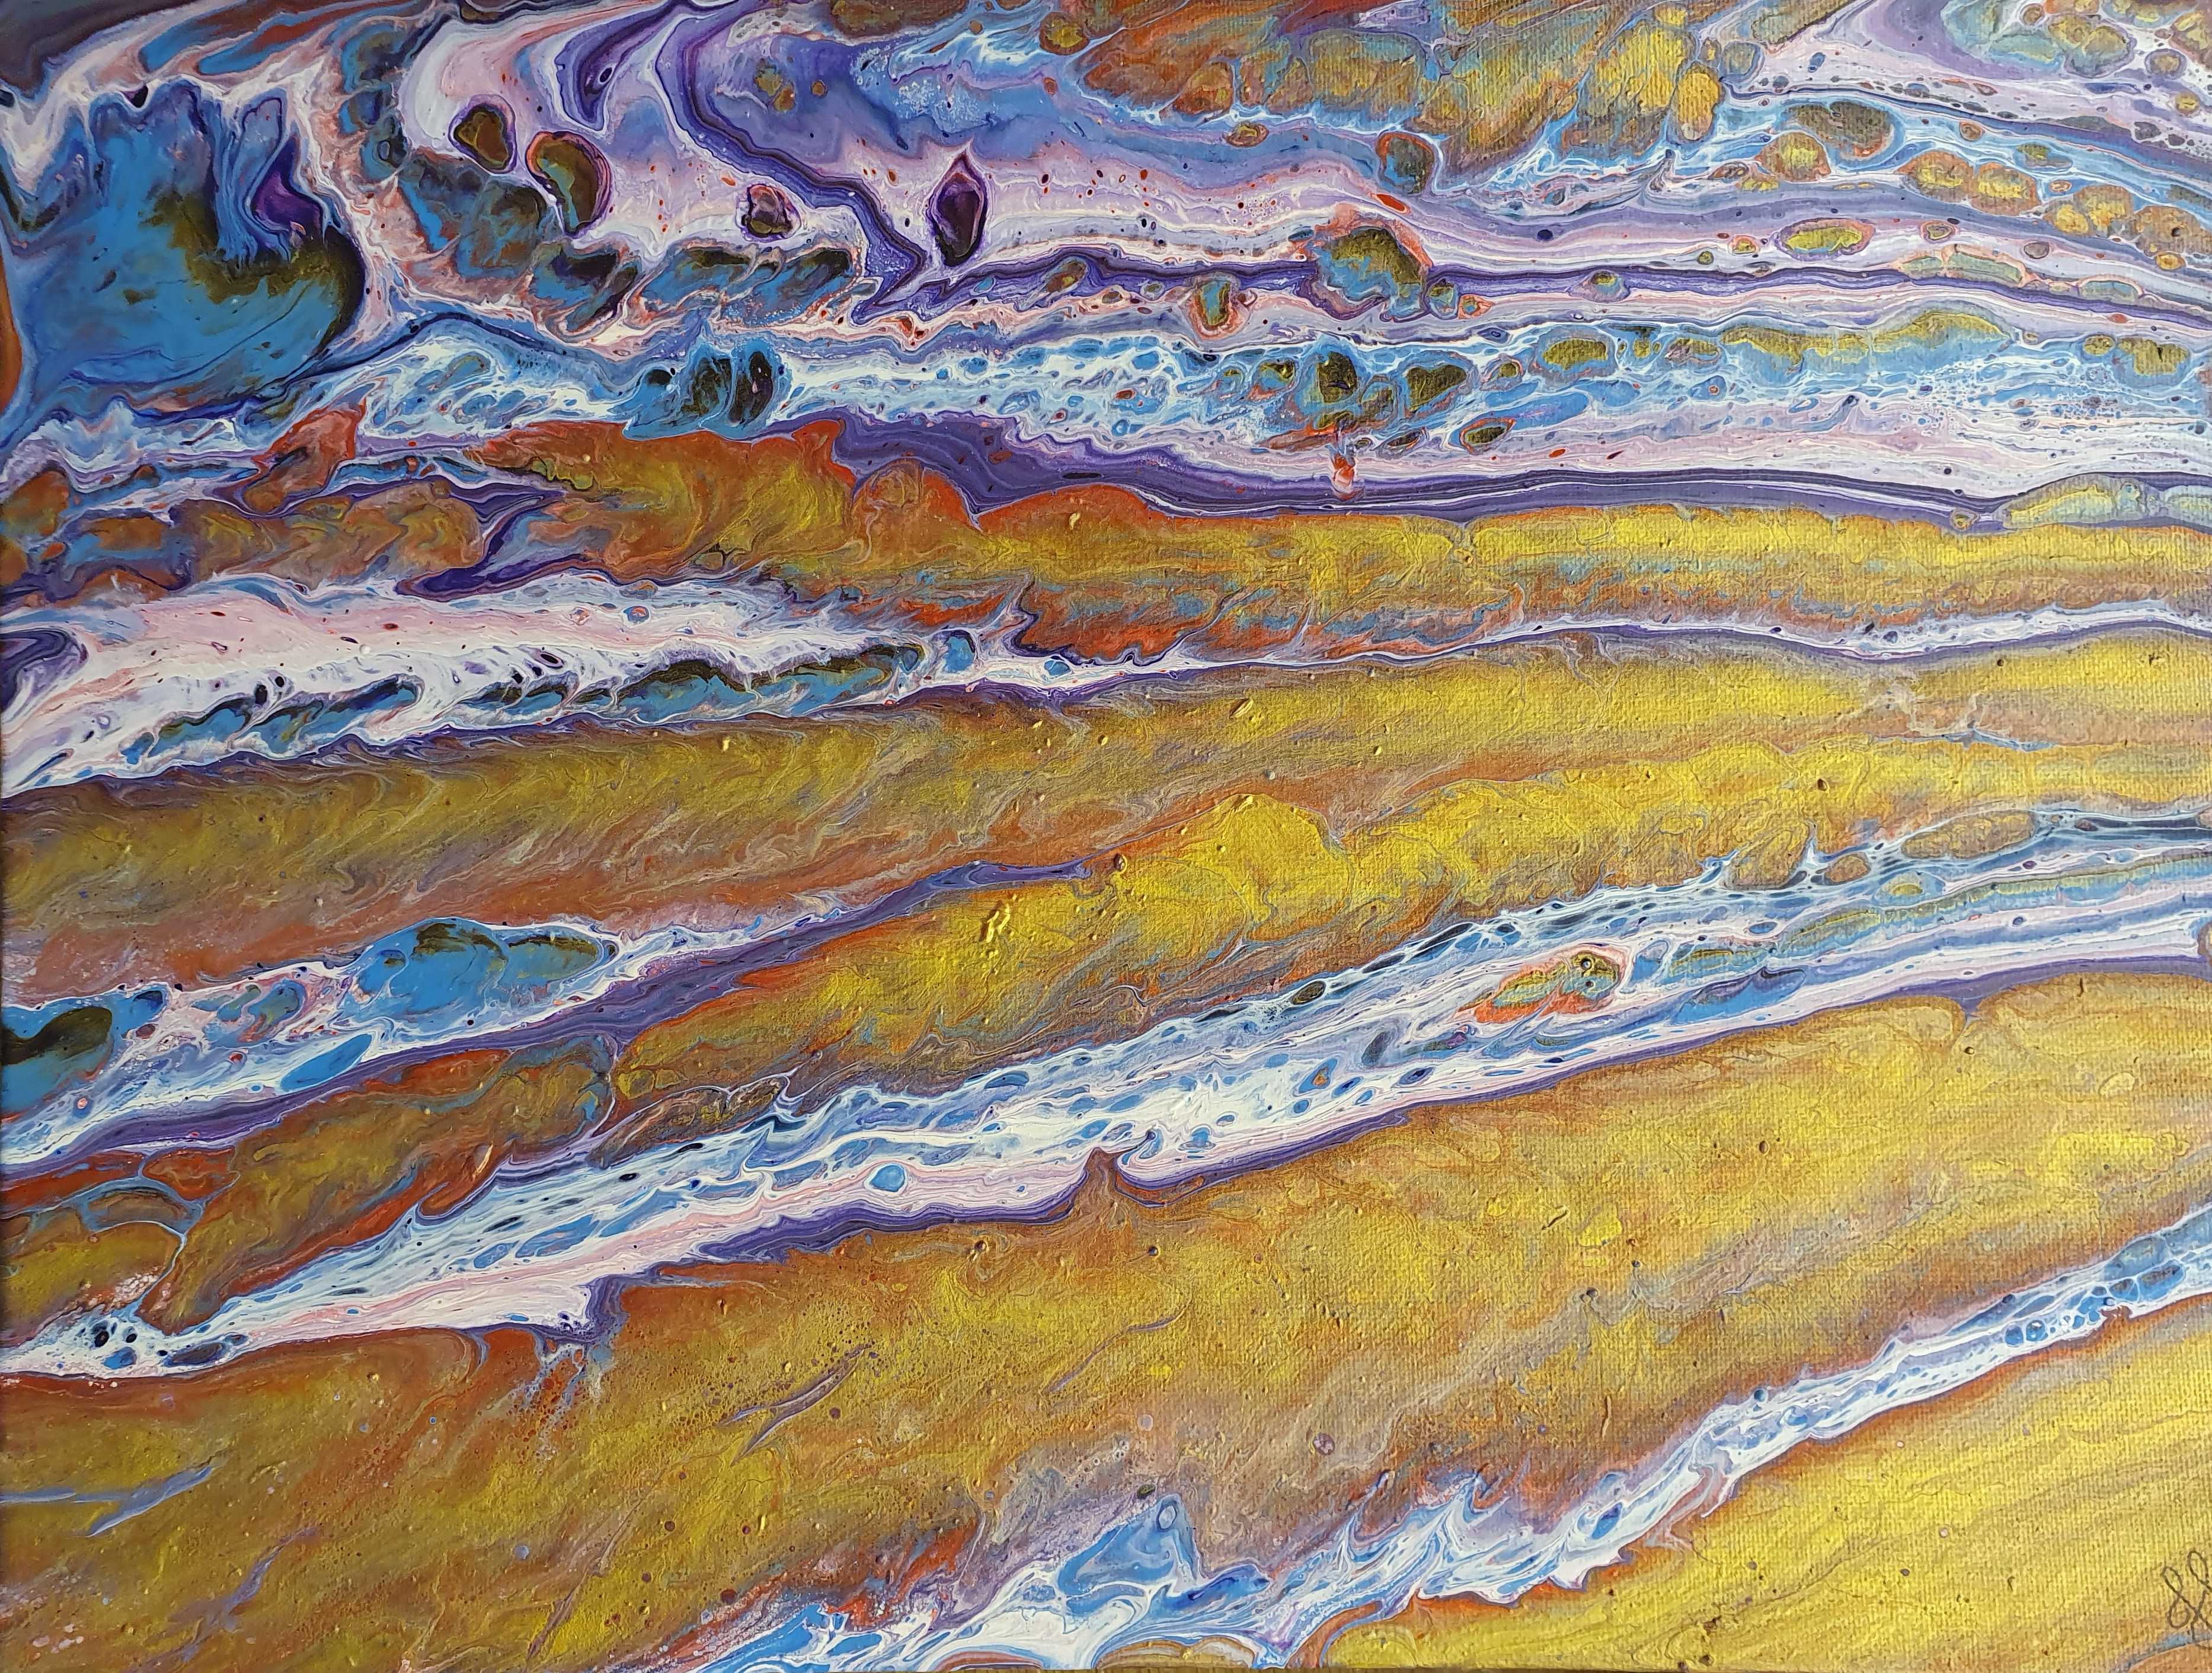 Abstract artwork of sand dunes